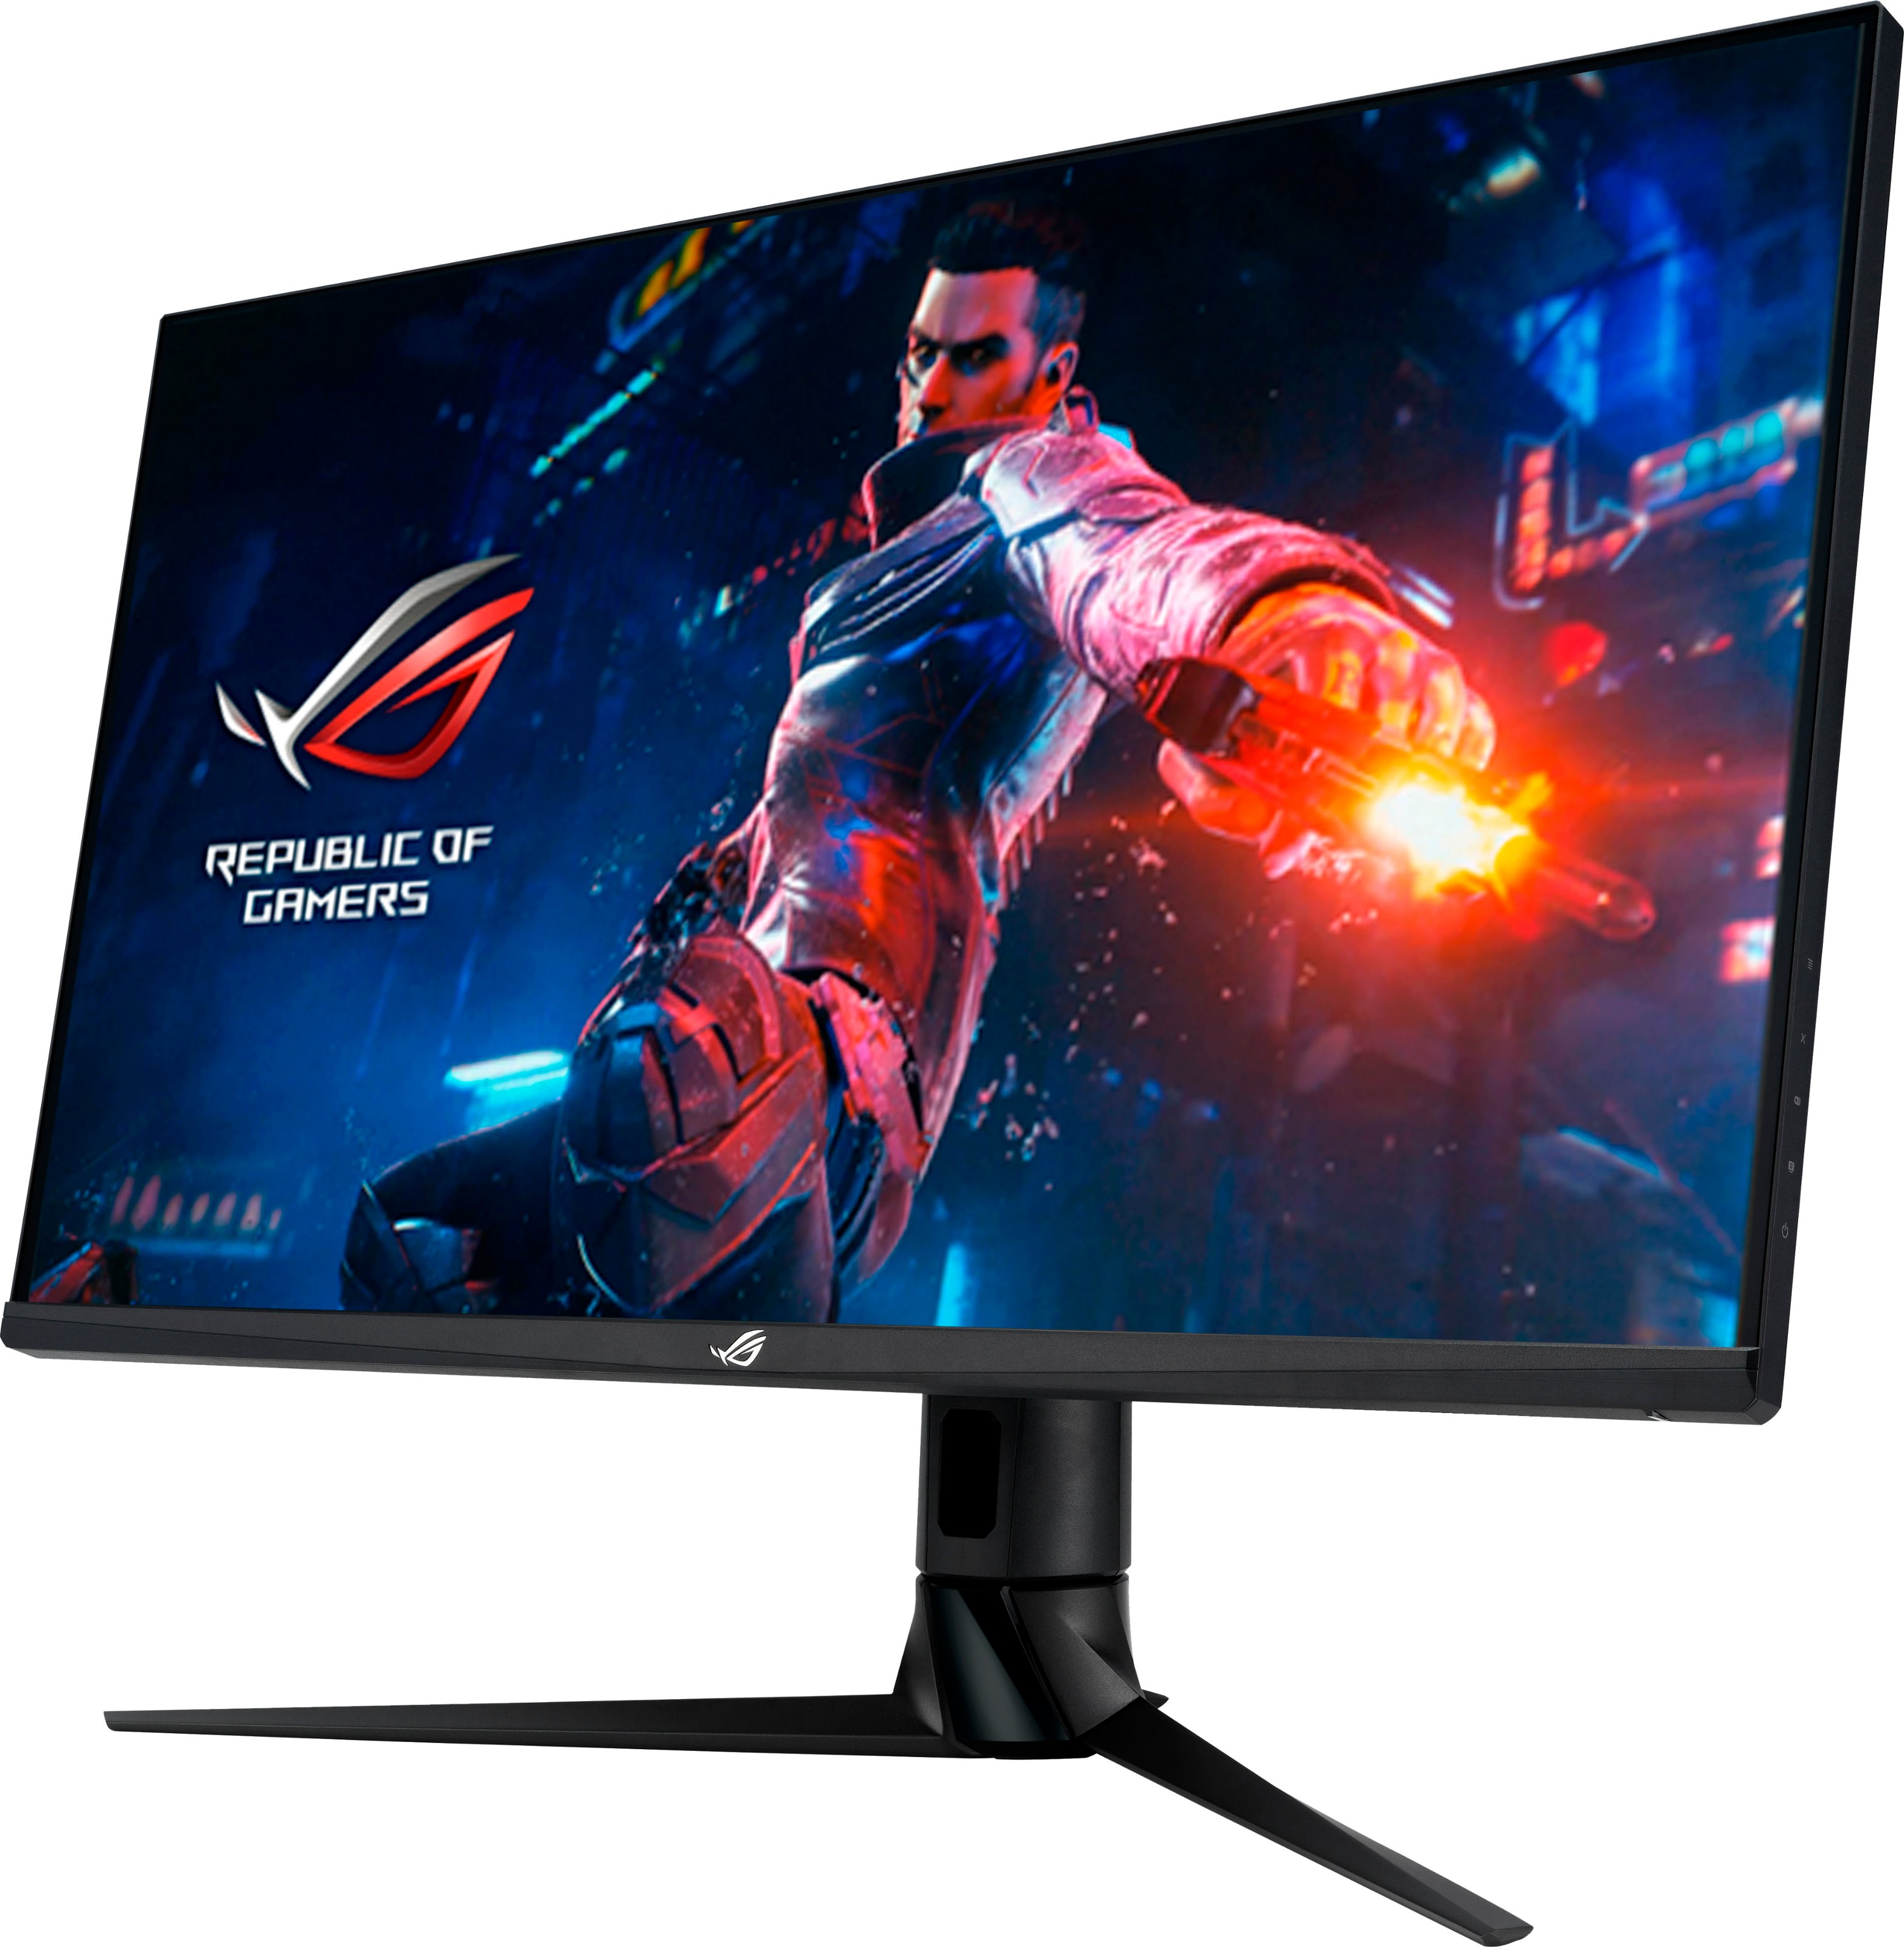 32 Computer Monitor 4K 144Hz IPS Gaming 1ms Response Free-Sync  G-Sync,400cd/m2,16:9, 93%DCI-P3, VESA 178° HDMI 2.1 For PS5 FPS